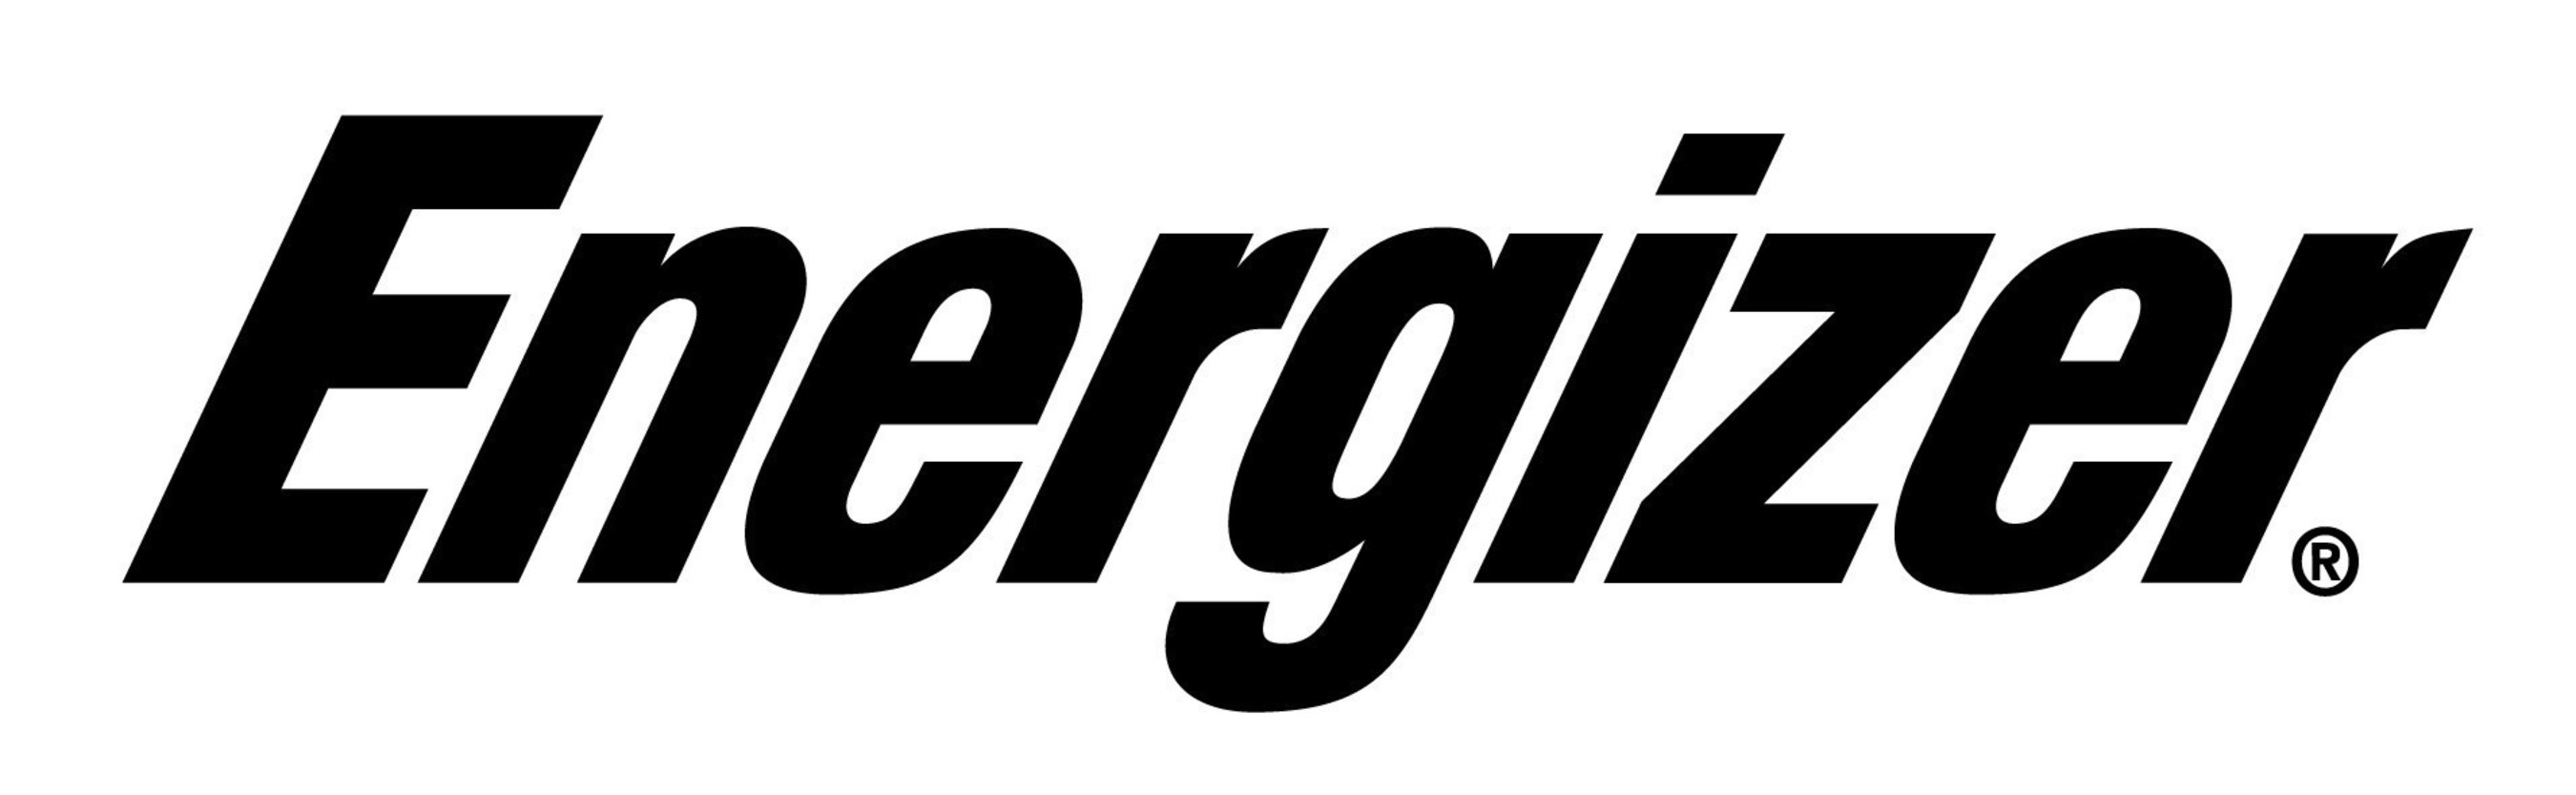 Energizer Introduces World's First AA and AAA Rechargeable Batteries Made  with Recycled Batteries